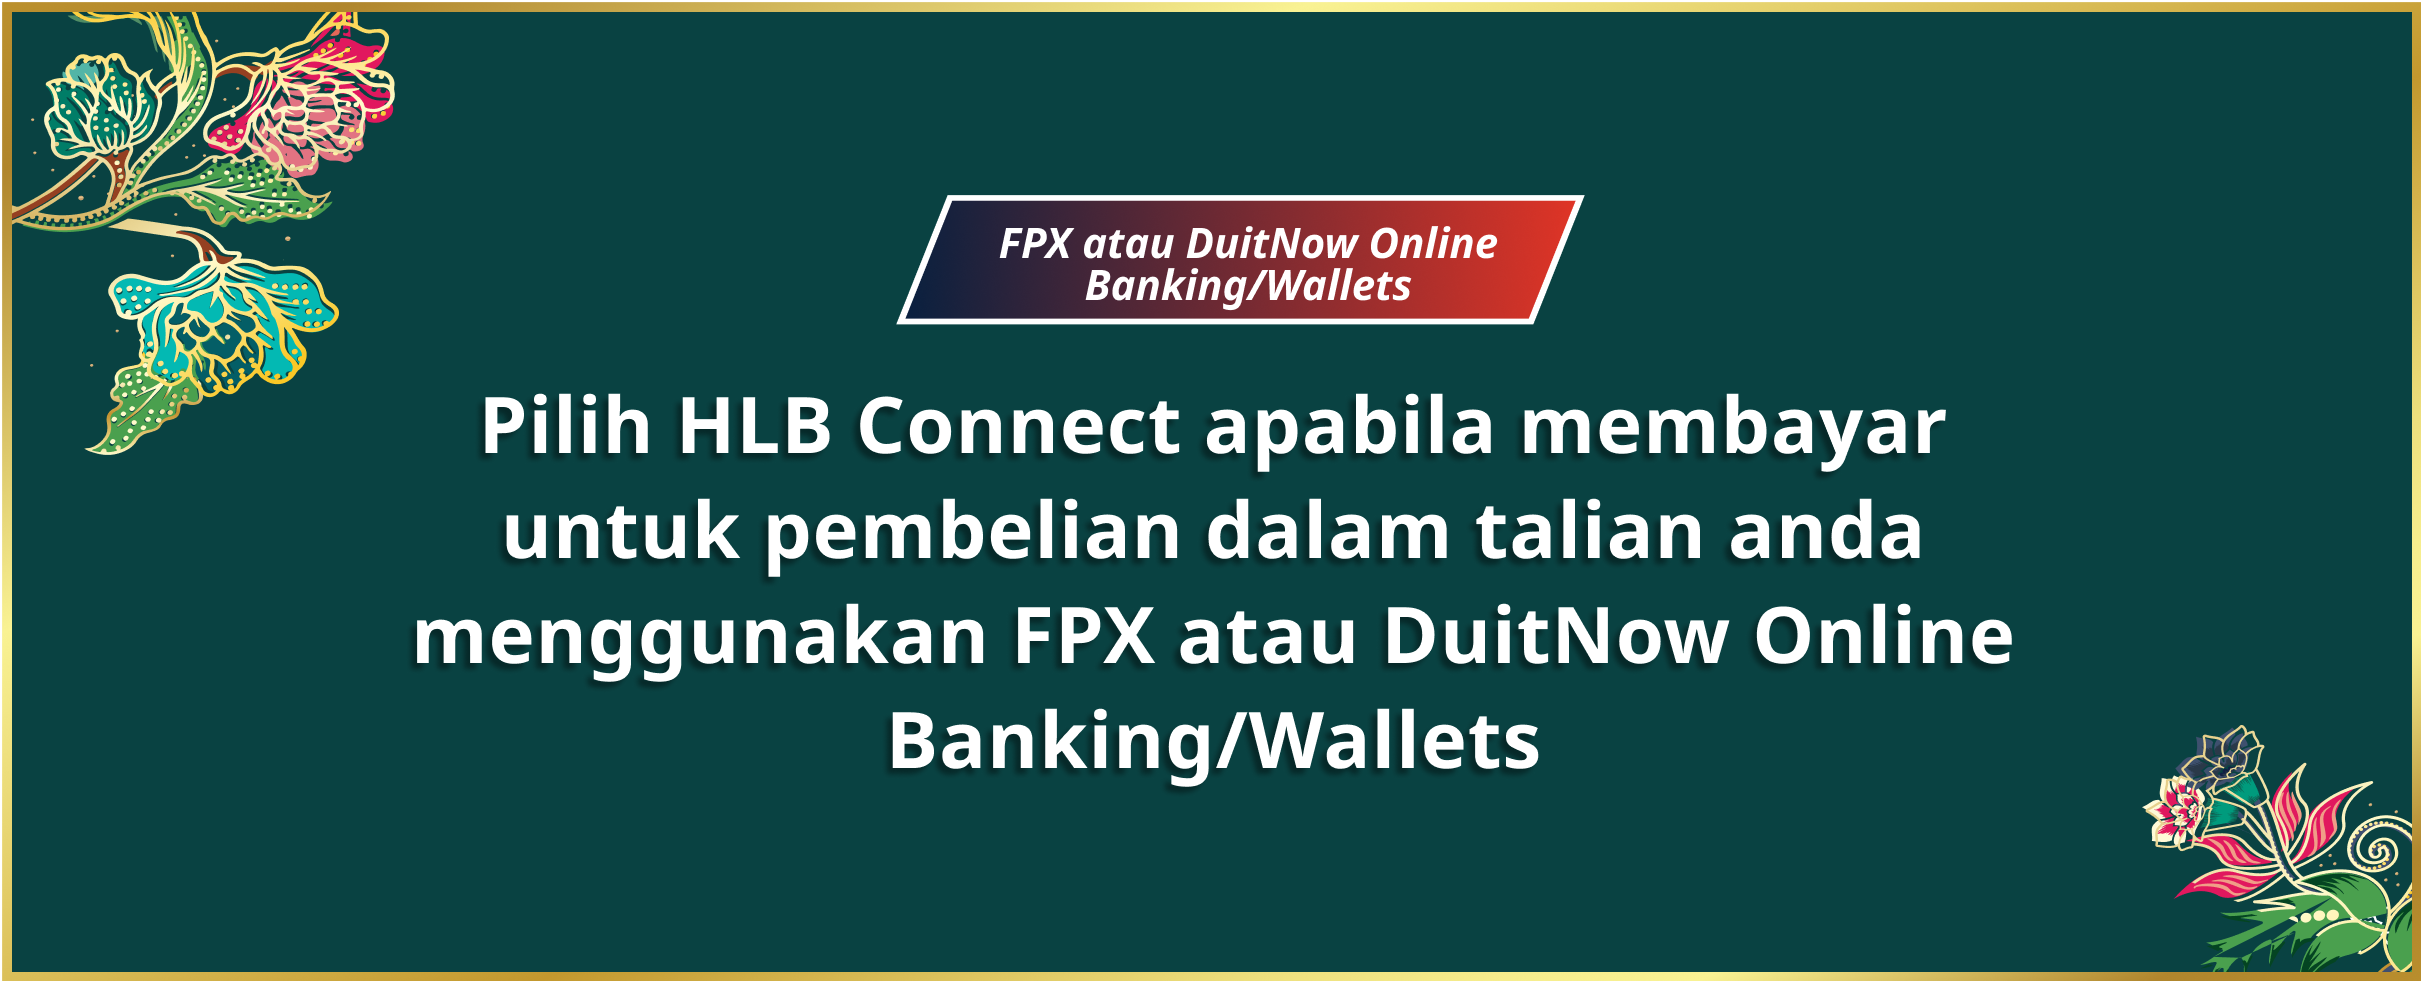 FPX or DuitNow Online Banking/Wallets